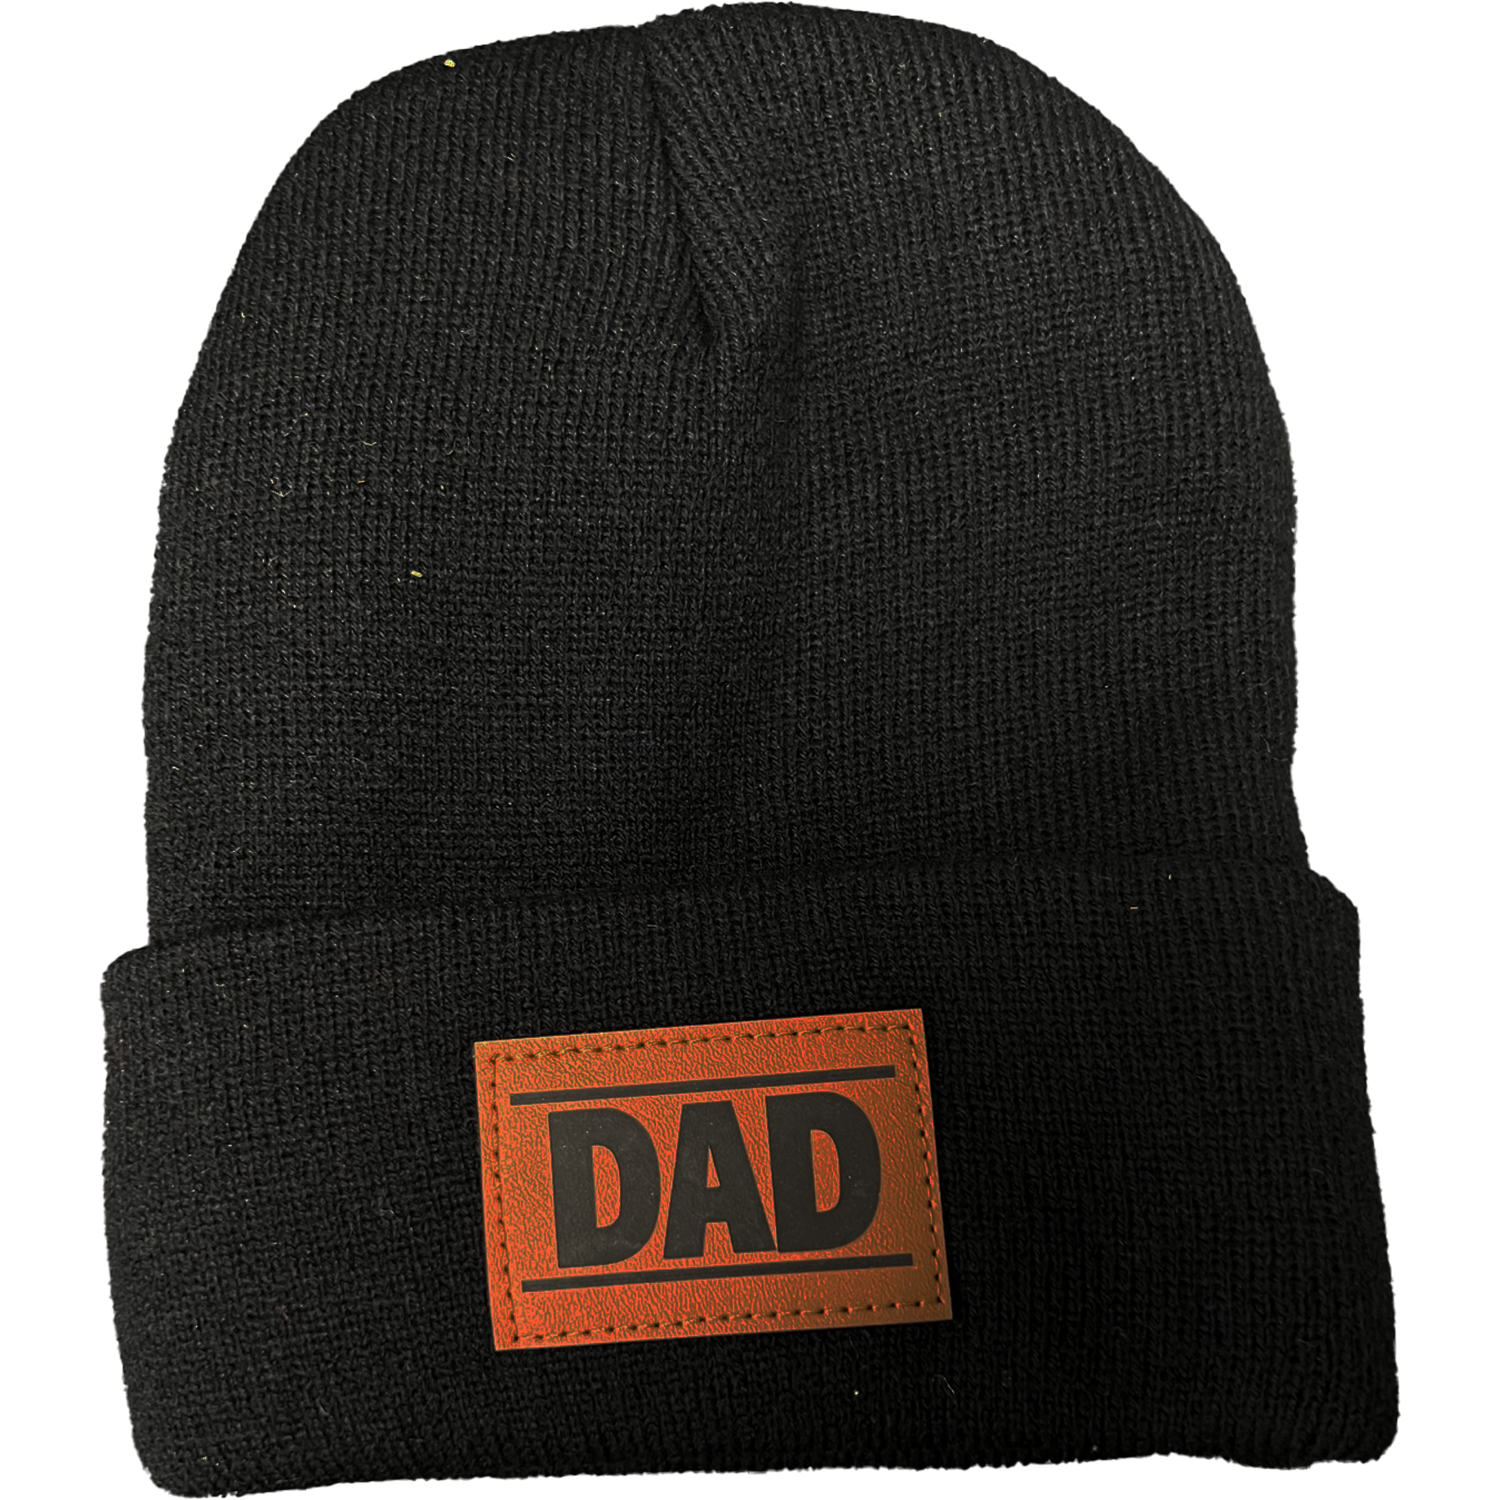 DAD KNITTED HAT